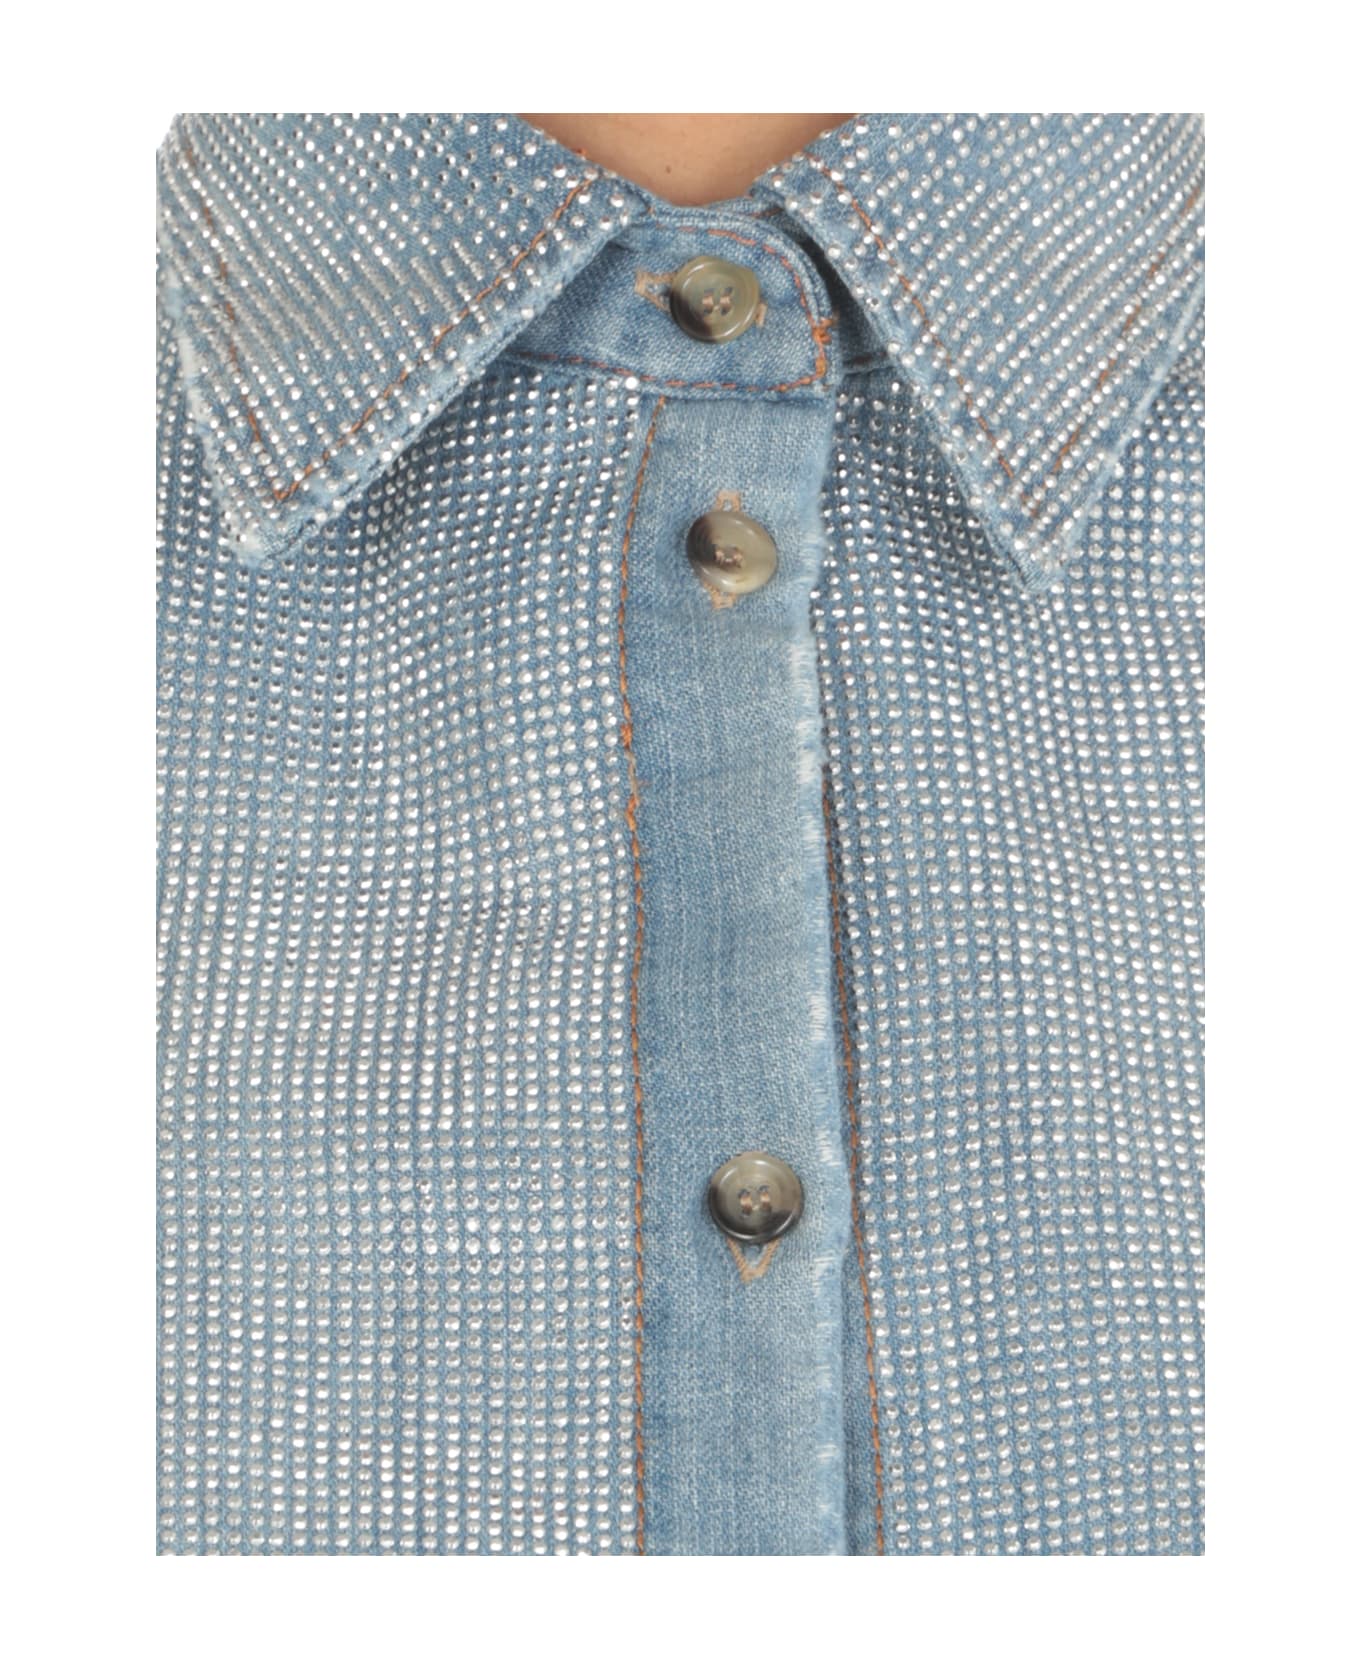 Ermanno Scervino Cotton Shirt With Strass - Light Blue シャツ